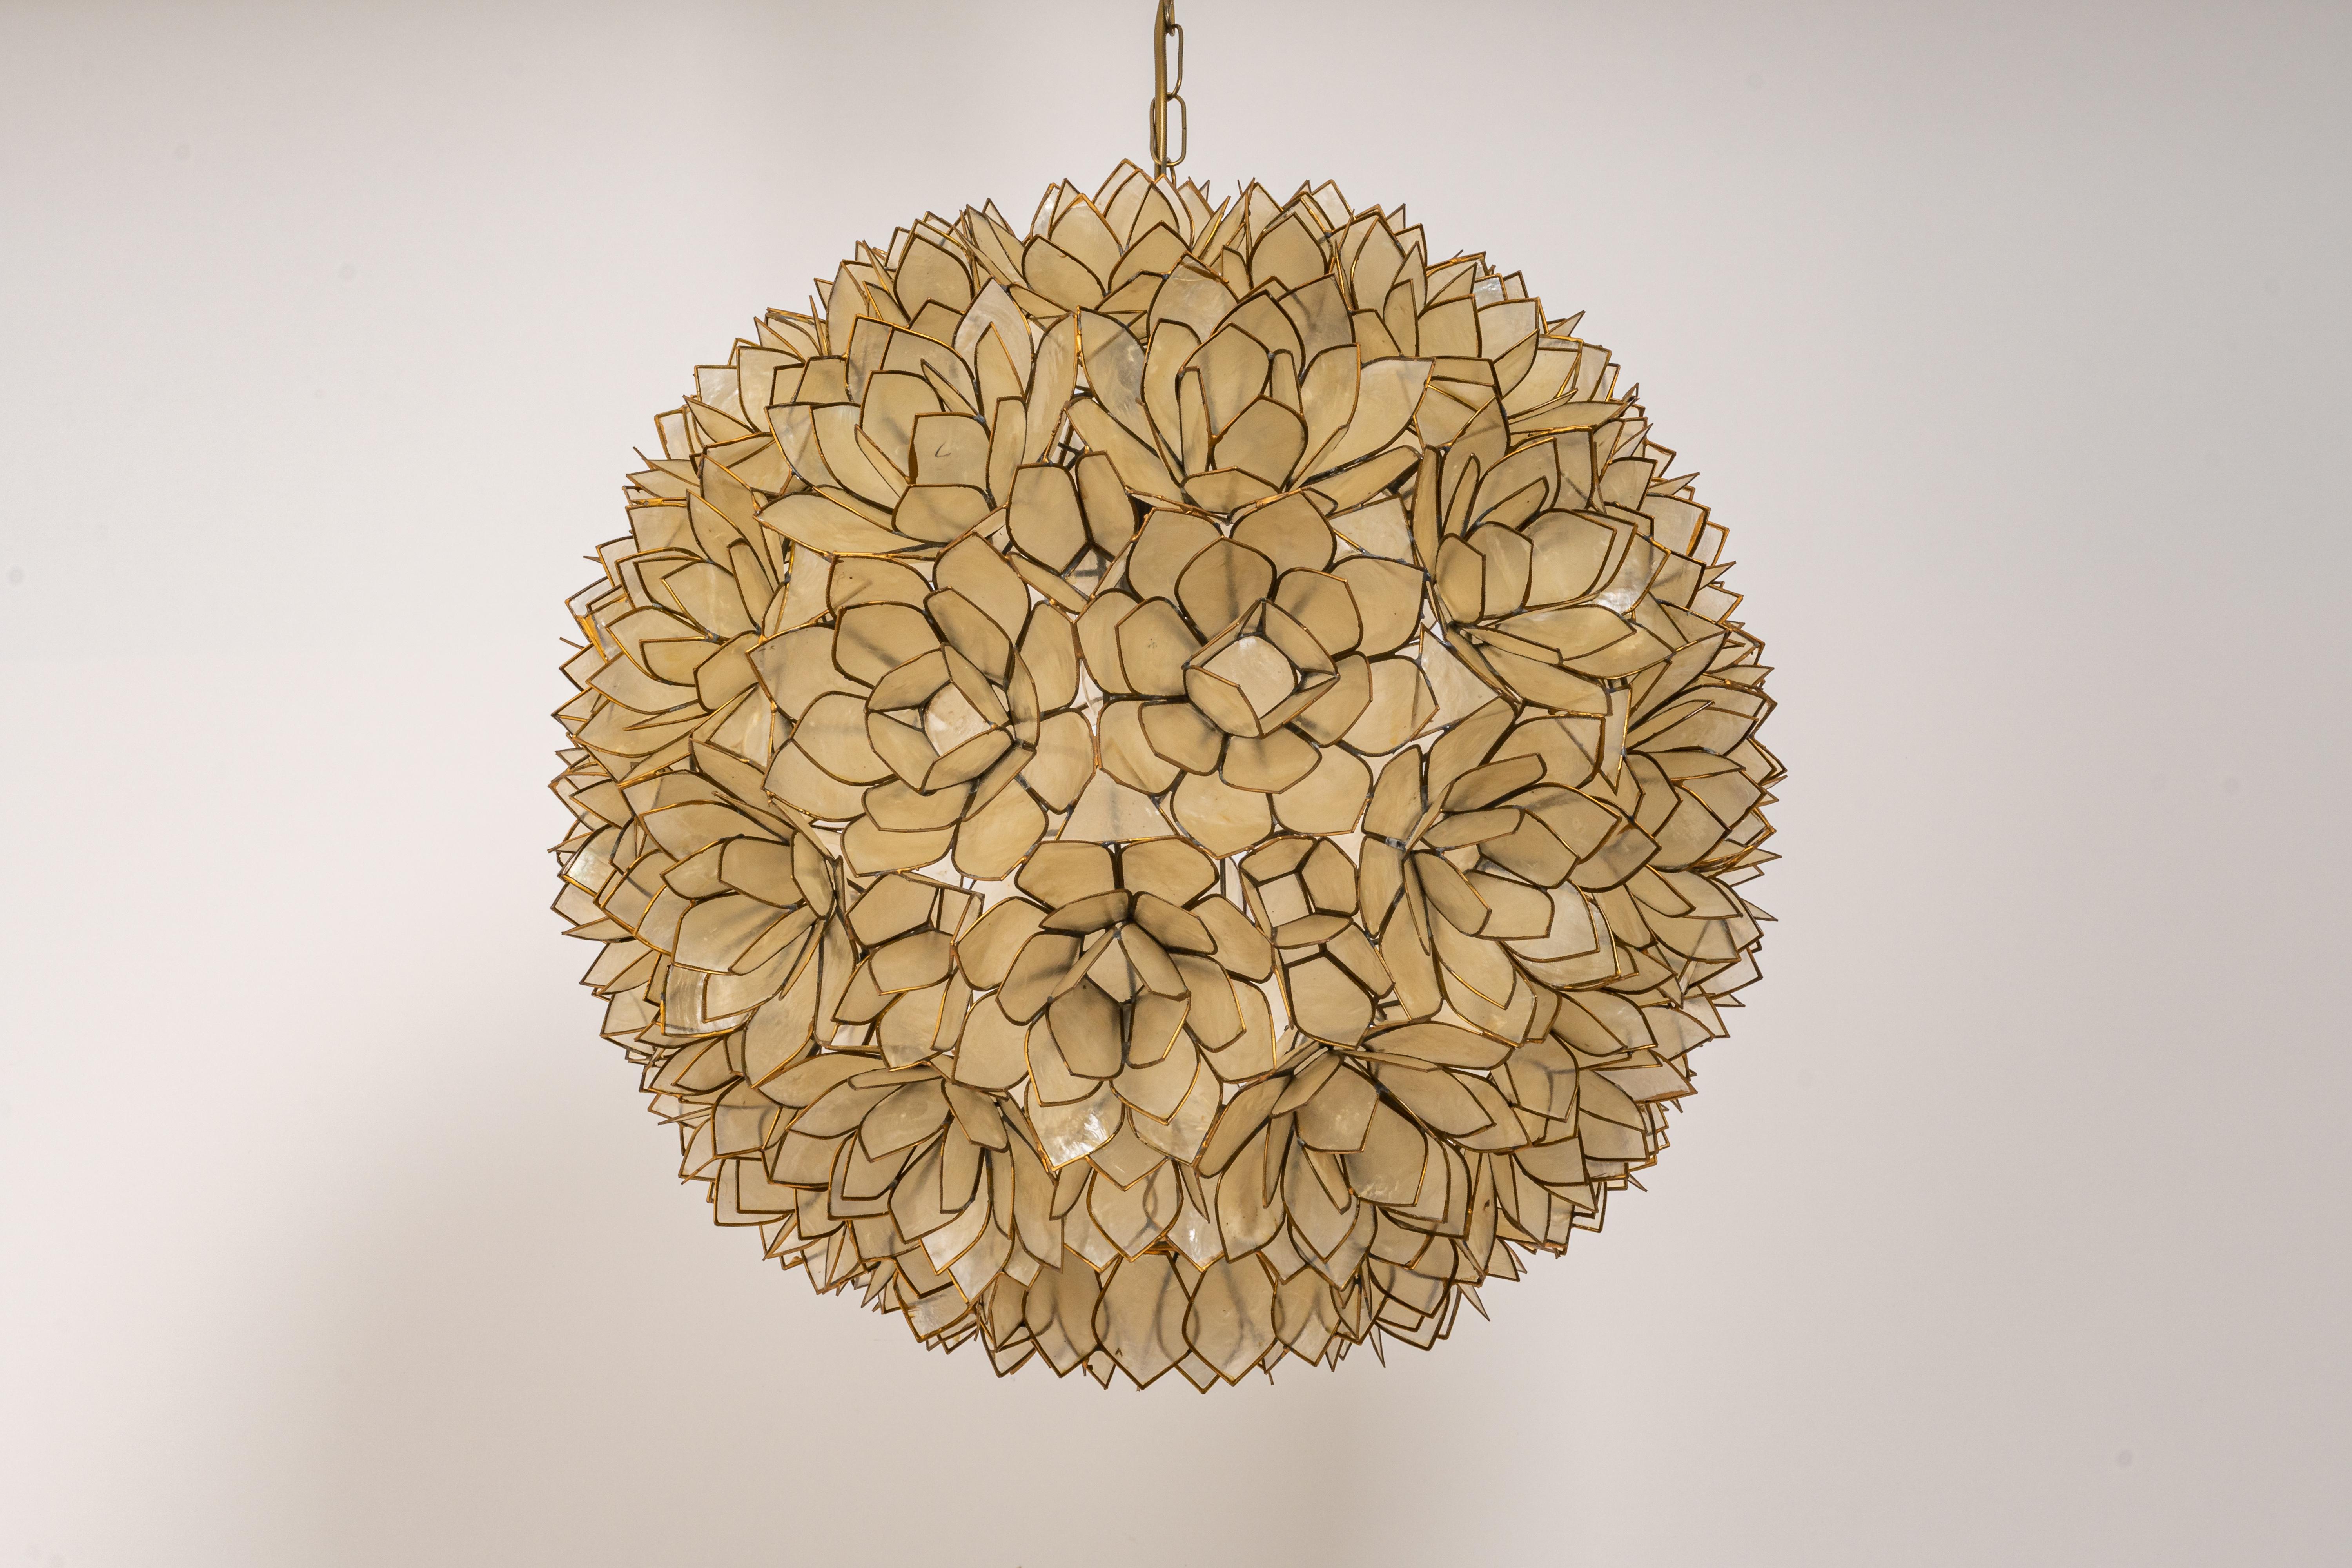 Stunning capiz shell Lotus ball chandelier pendant light Germany, 1960s

It requires 1 x E27 standard bulbs with 100W max each.
A light bulb is not included. It is possible to install this fixture in all countries (US, UK, Europe, Asia,